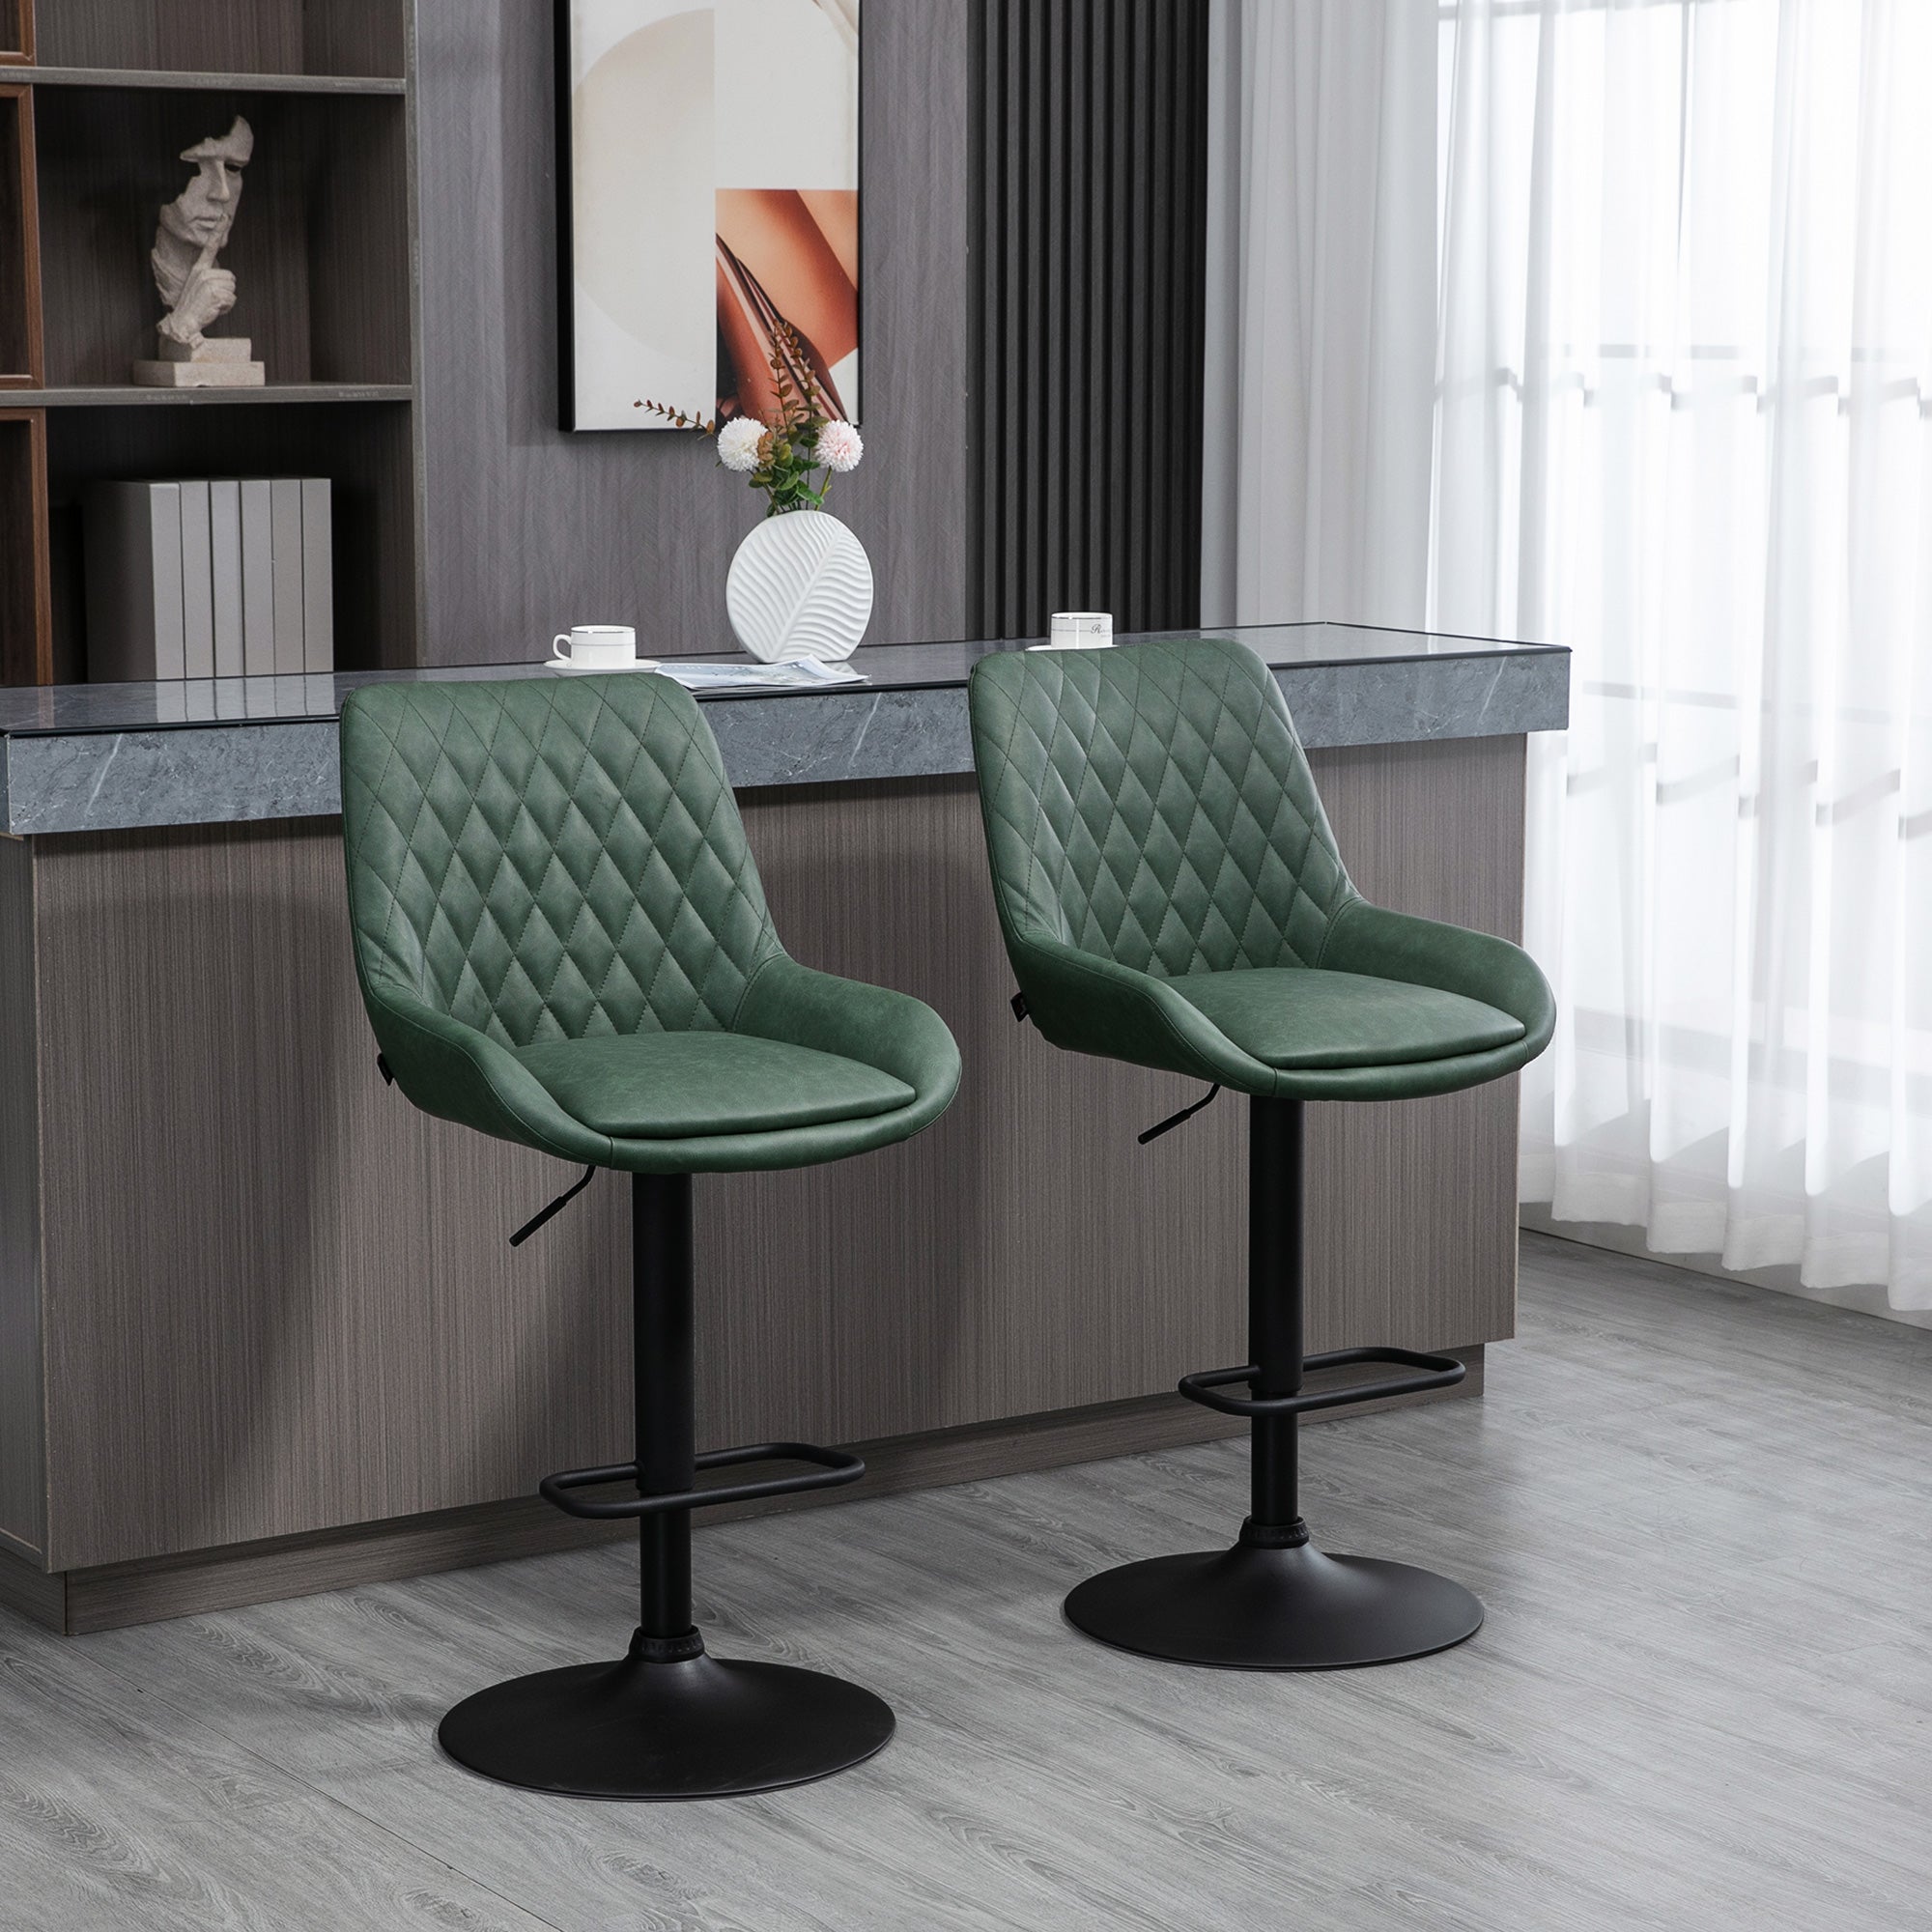 Retro Bar Stools Set of 2, Adjustable Kitchen Stool, Upholstered Bar Chairs with Back, Swivel Seat, Green  AOSOM   